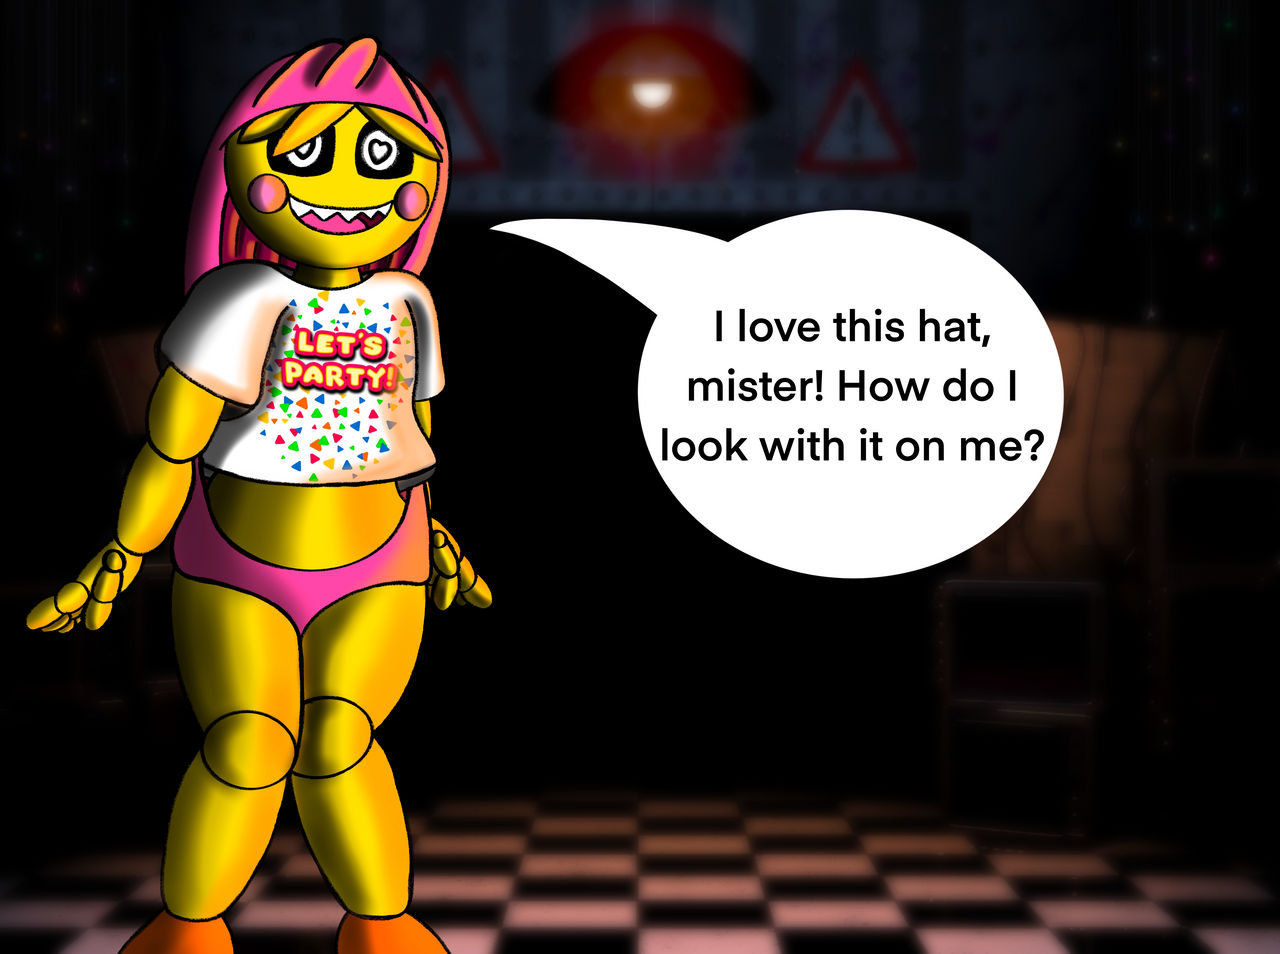 Welcome to Freddy's — So Funtime Chica hears a sound and finds a